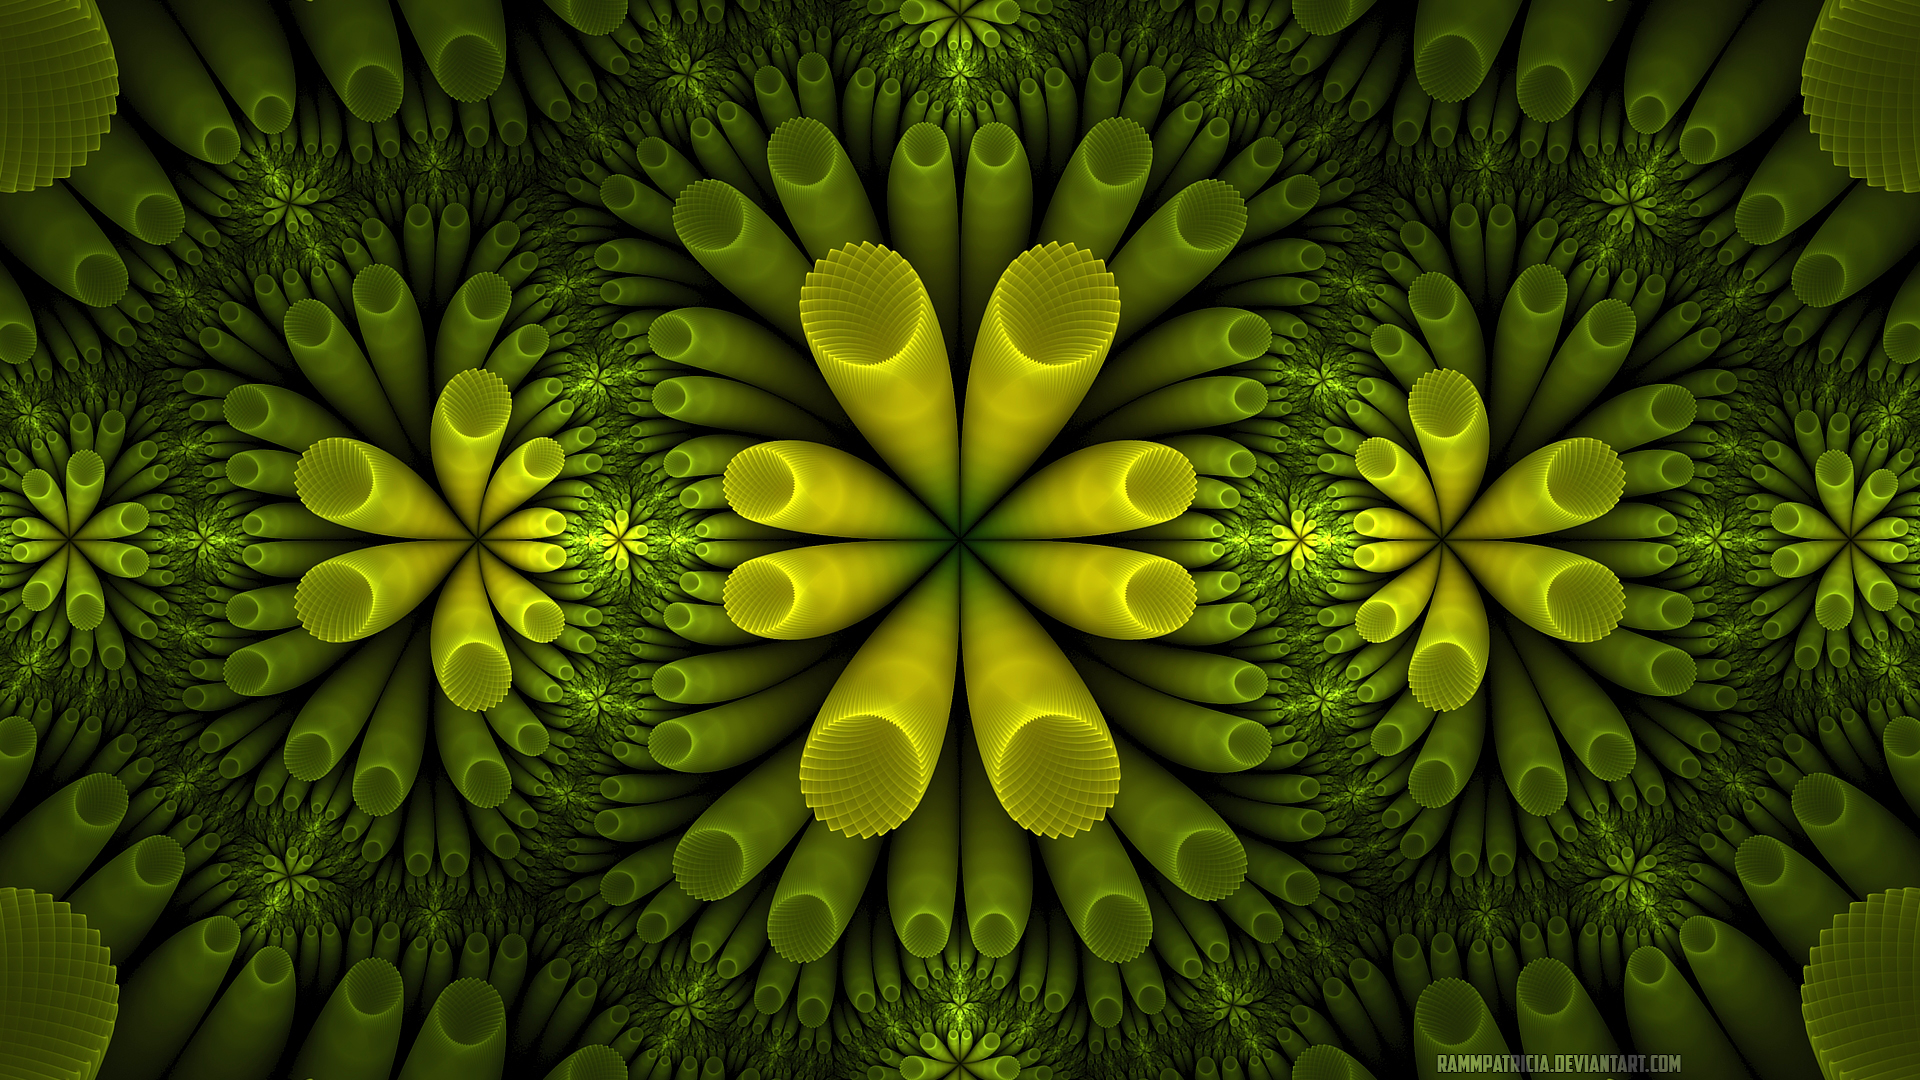 Fractal Microscopic Plants Abstract Digital Art Chaotica RammPatricia Nature Watermarked 1920x1080